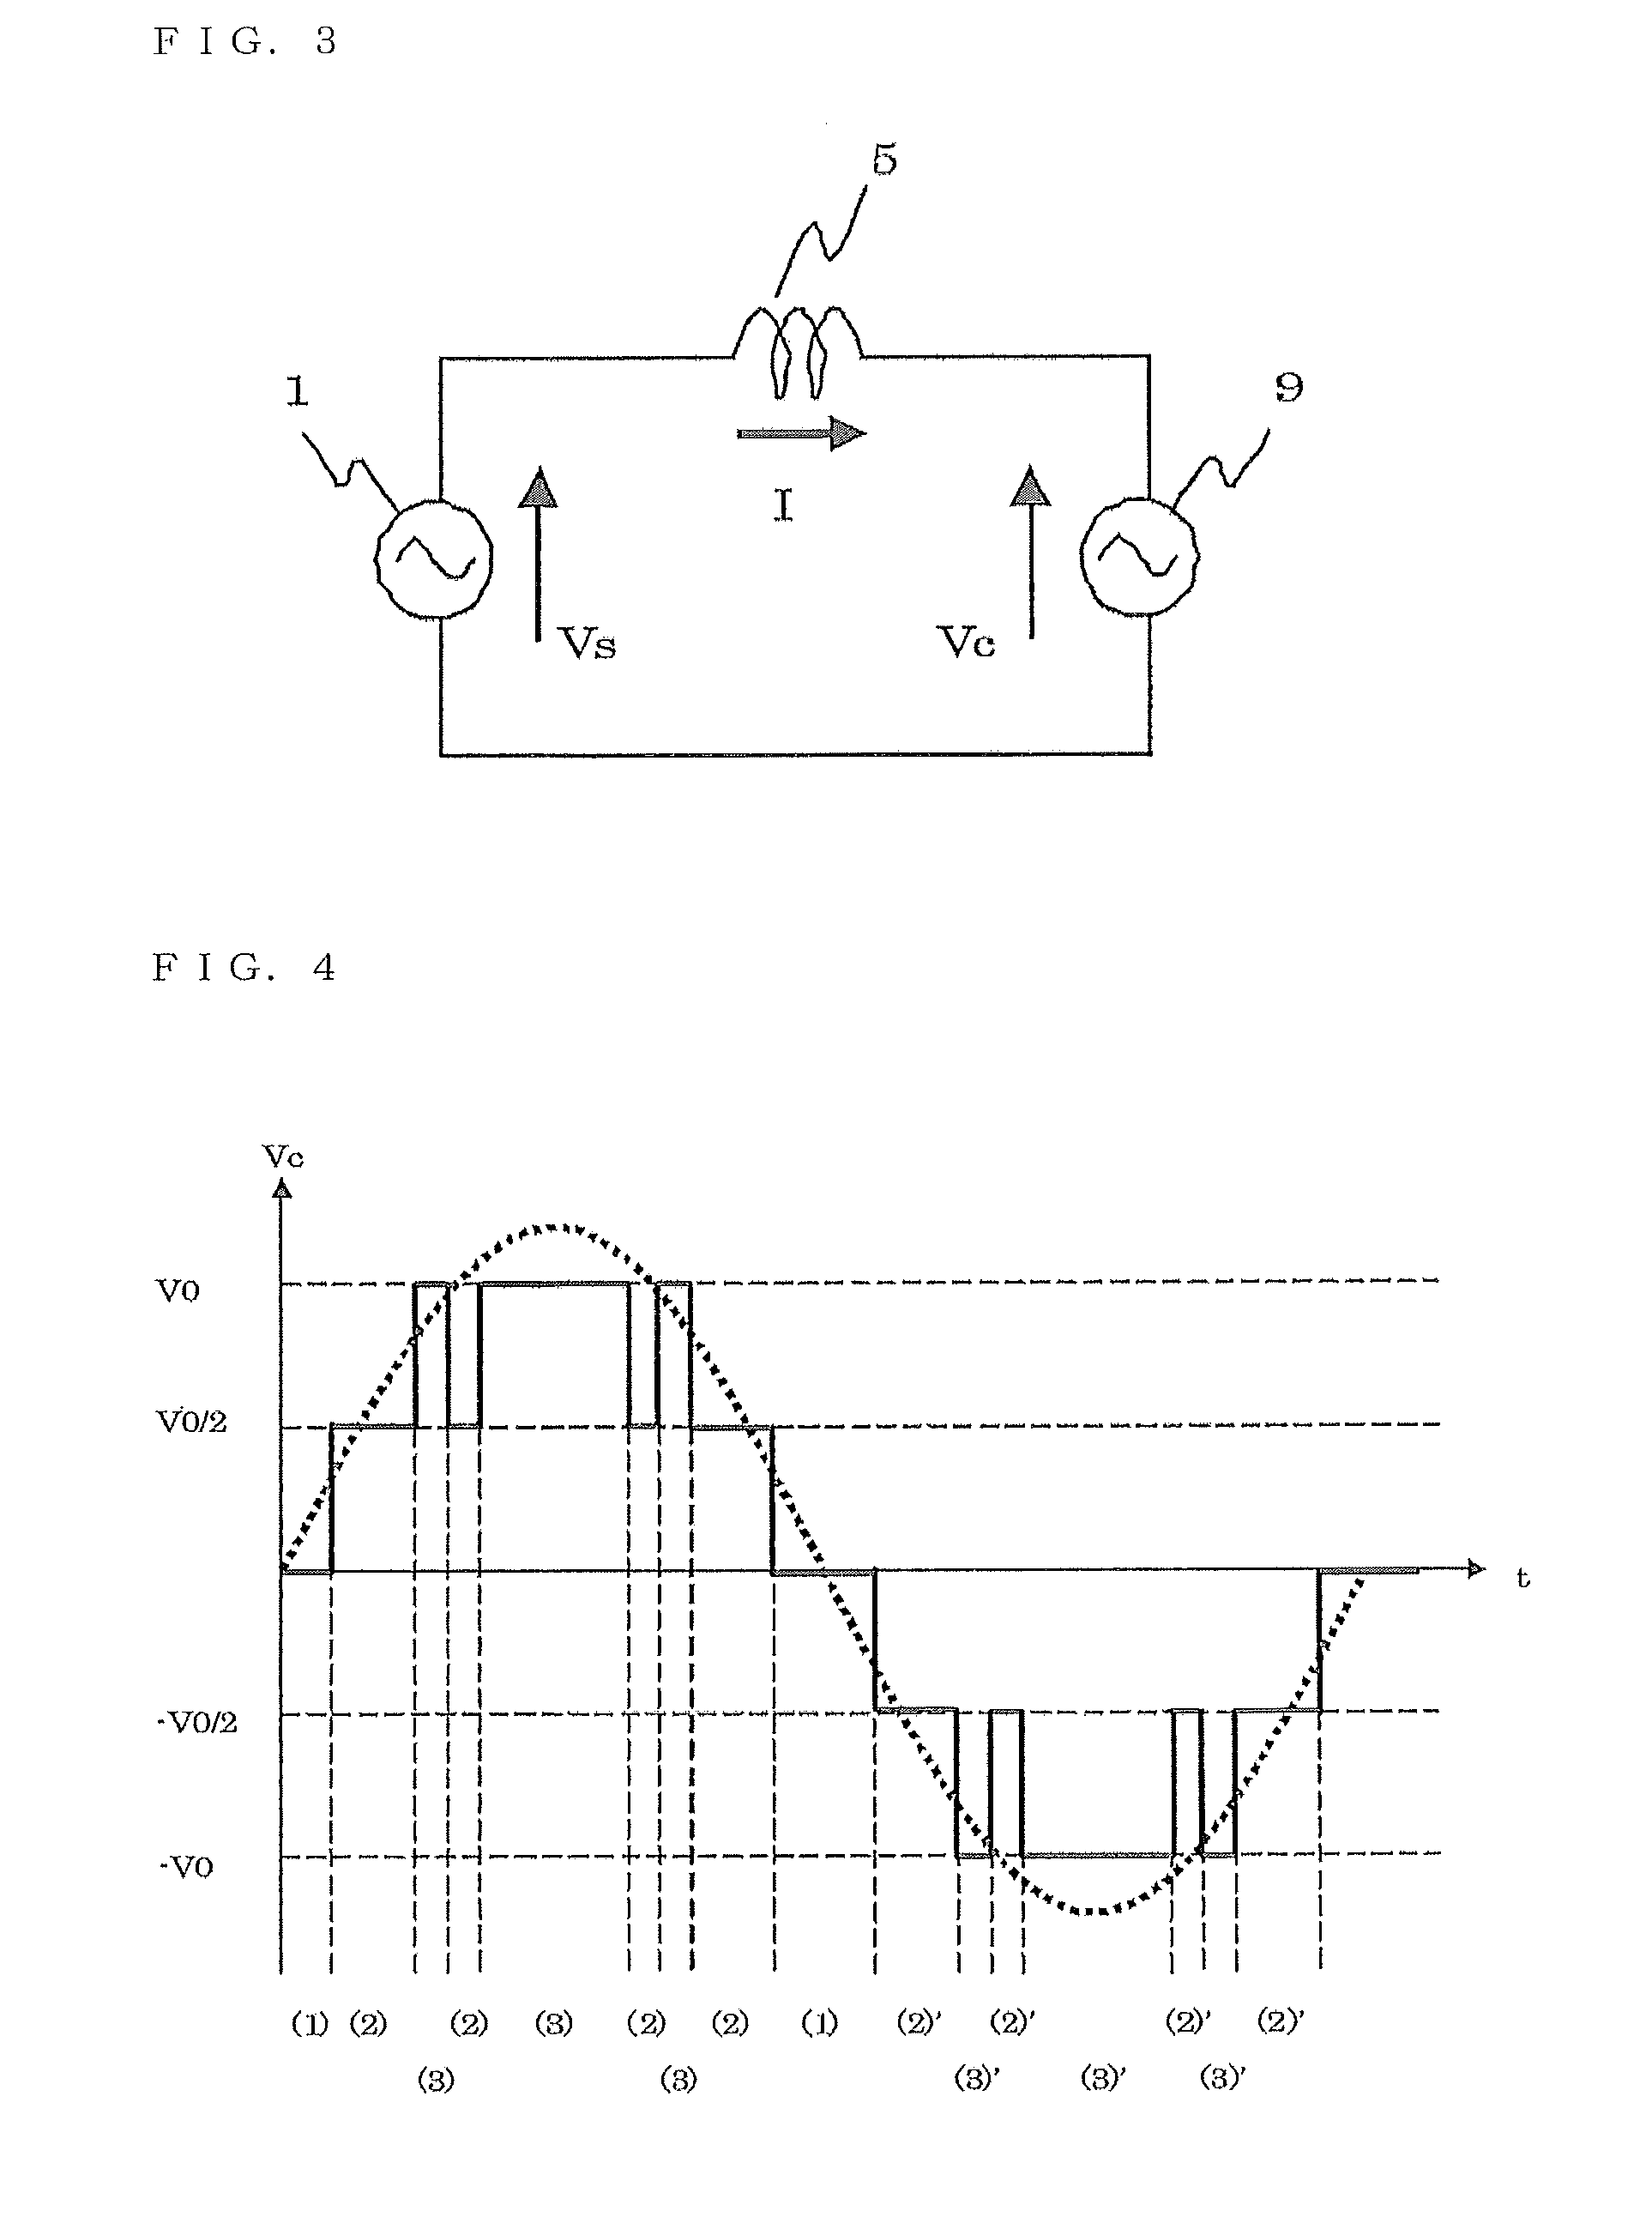 Ac-dc converter, method of controlling the same, motor driver, compressor driver, air-conditioner, and heat pump type water heater